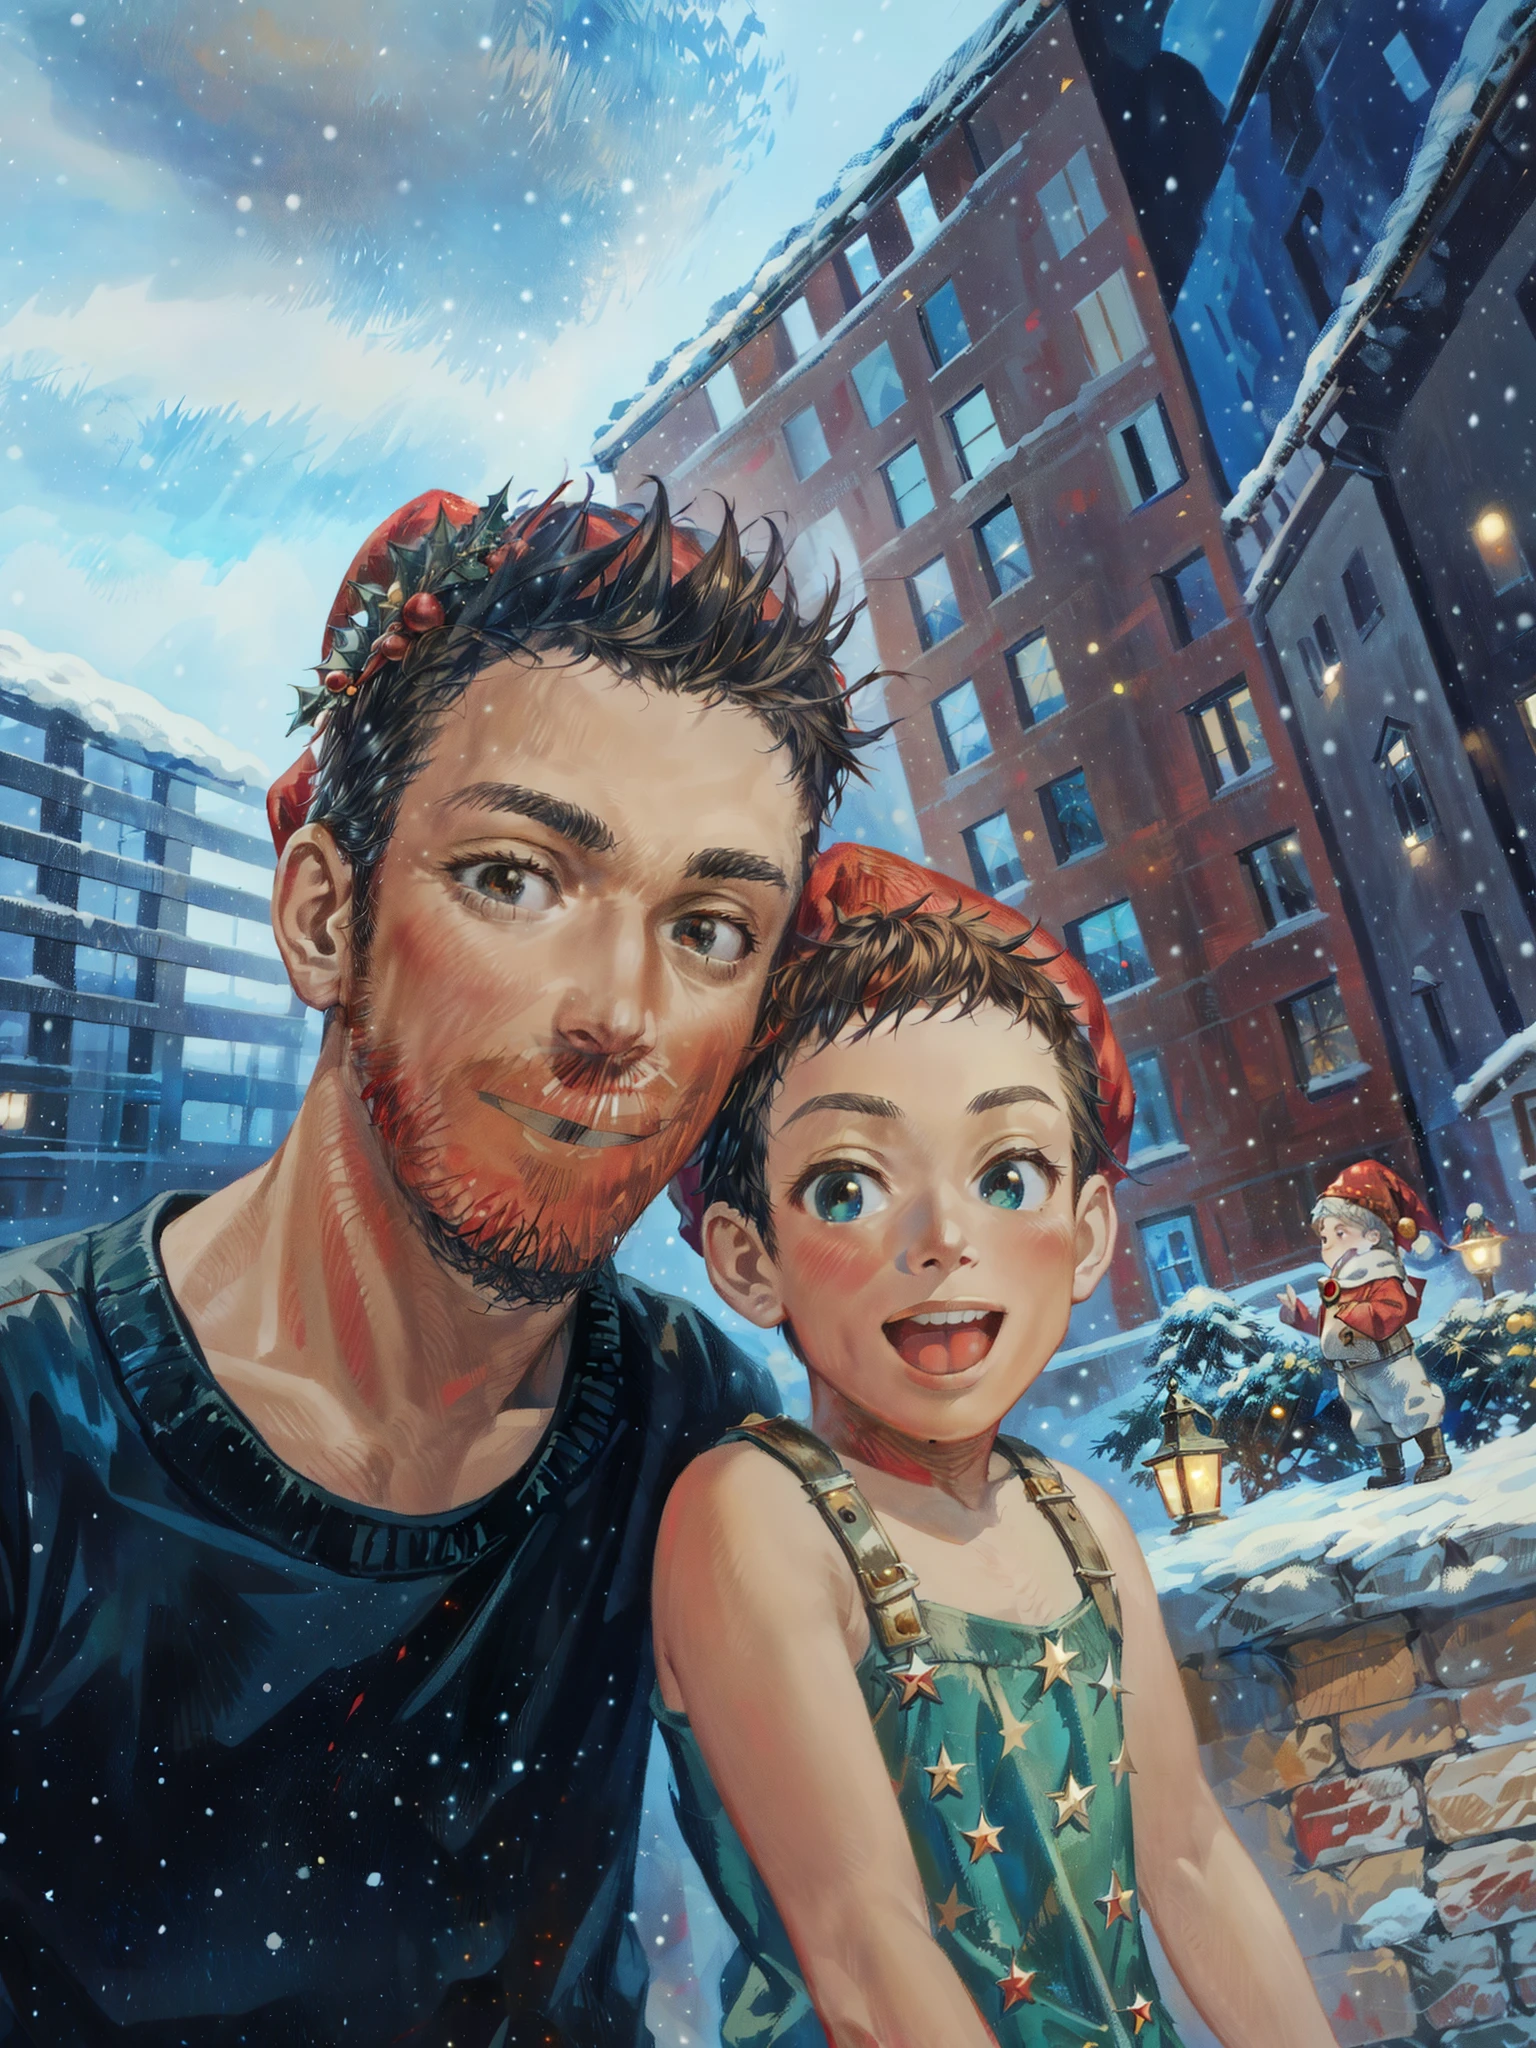 hd, (best details), (best quality), disney style, happy, masterpiece, best quality, high resolution, christmas, lights, snow, young people, (((red Christmas hat))) Christmas decoration,there is a man and a boy that are standing together,